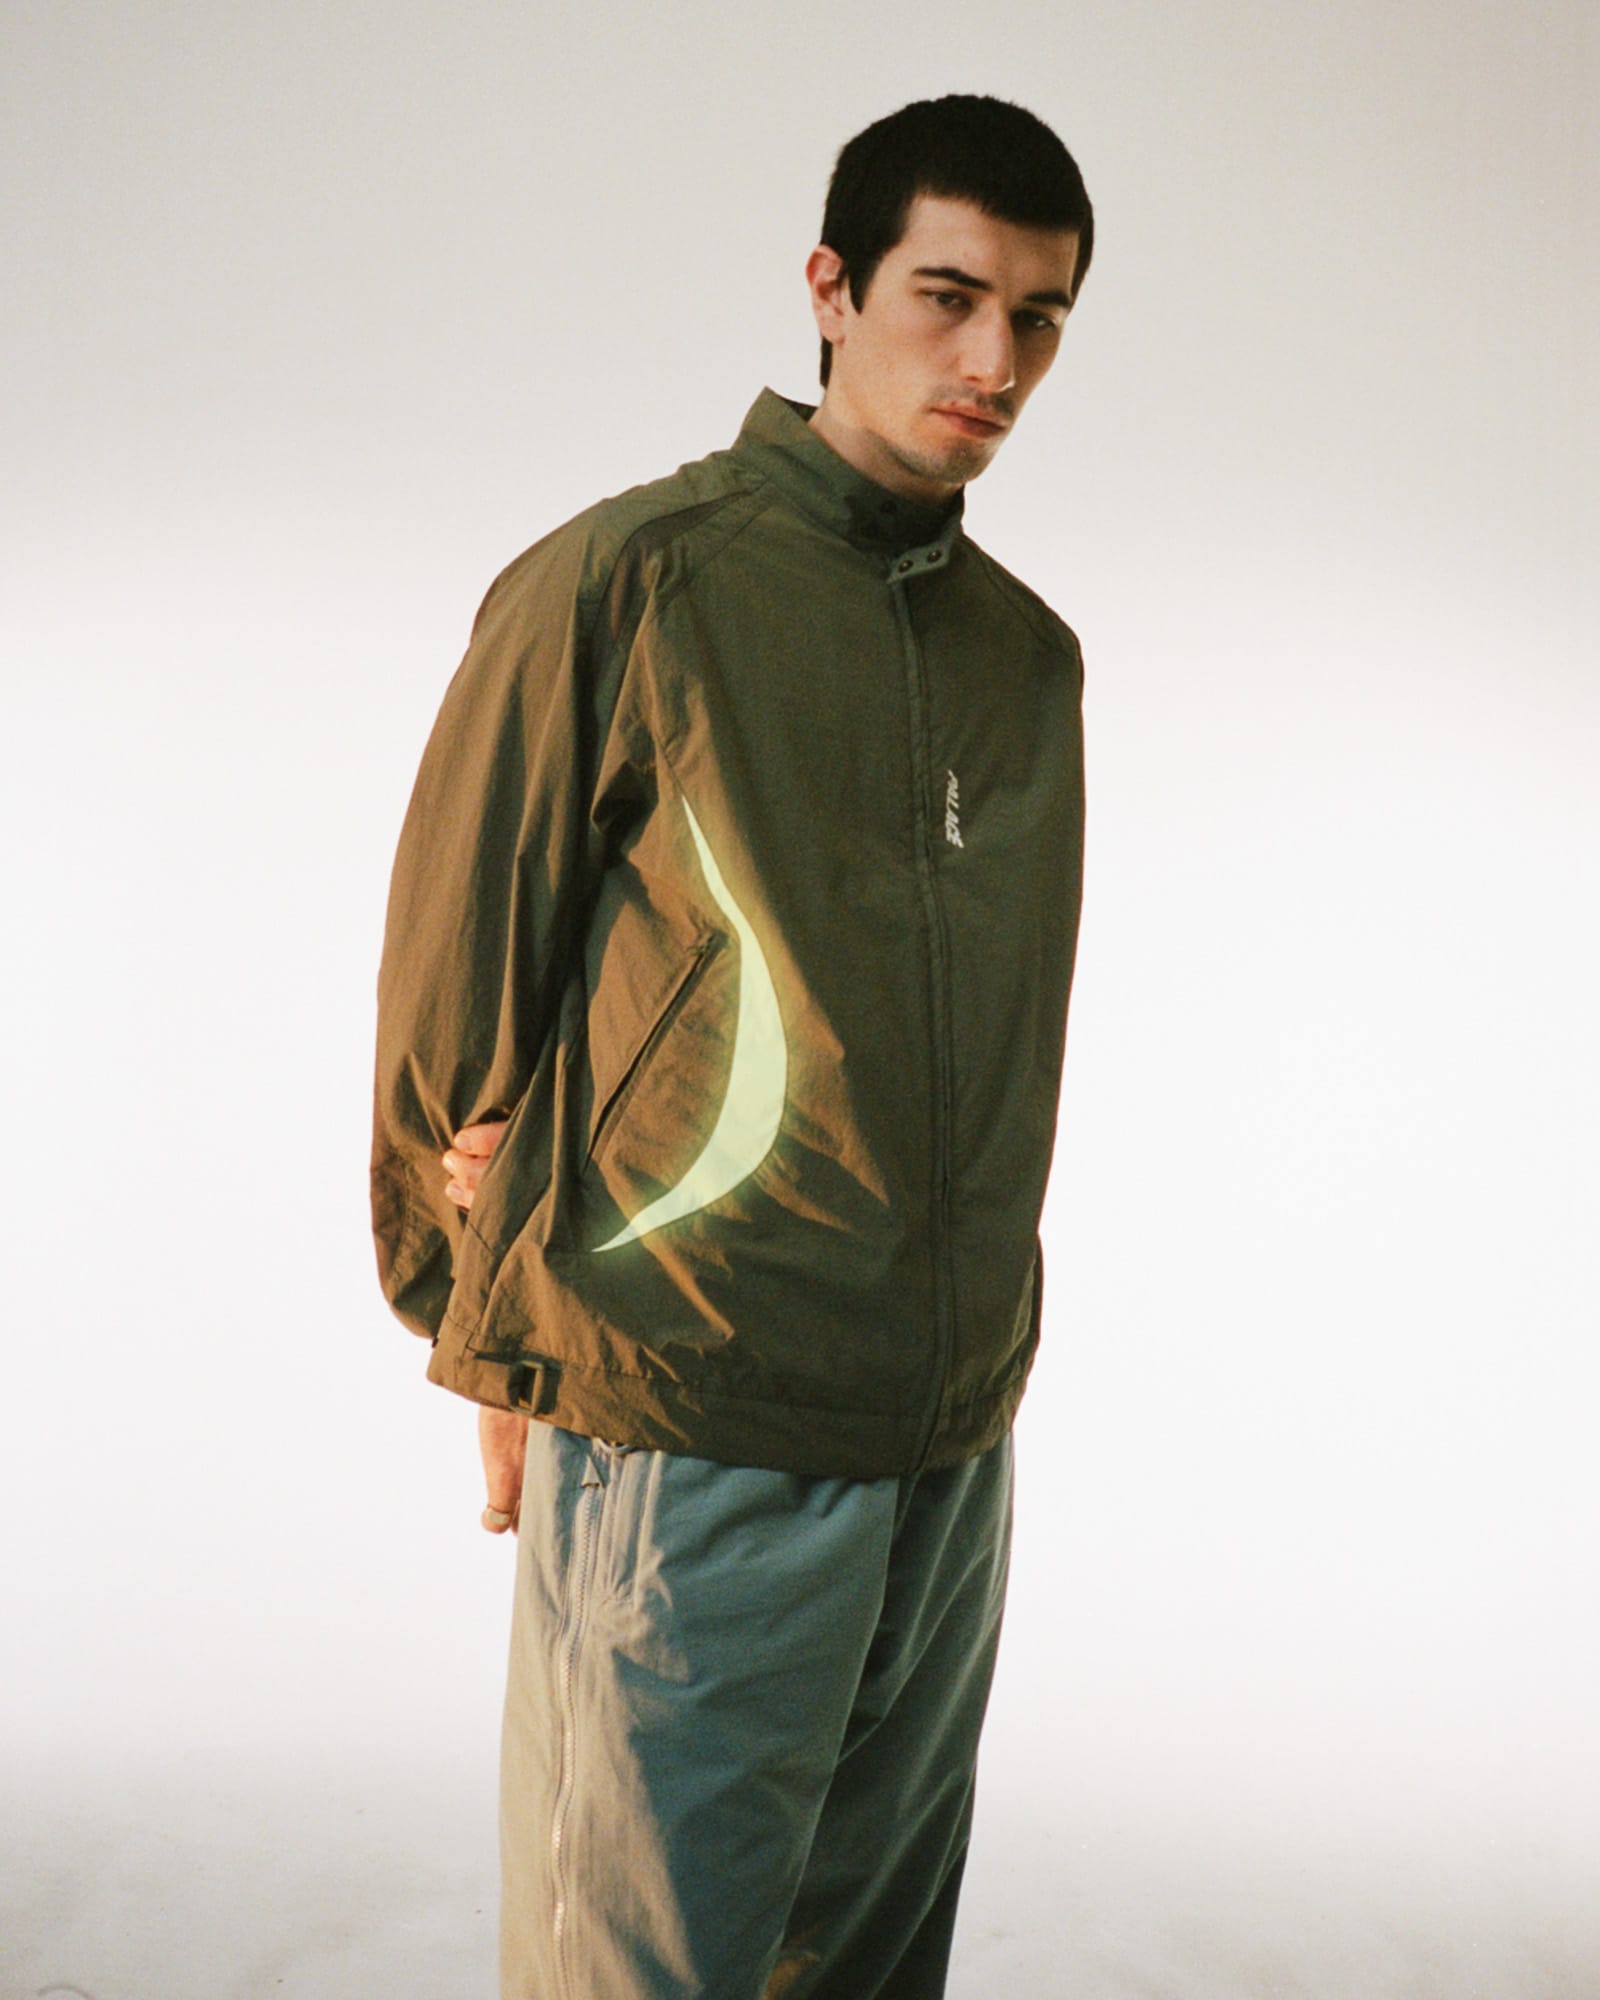 Palace lookbook model is pictured